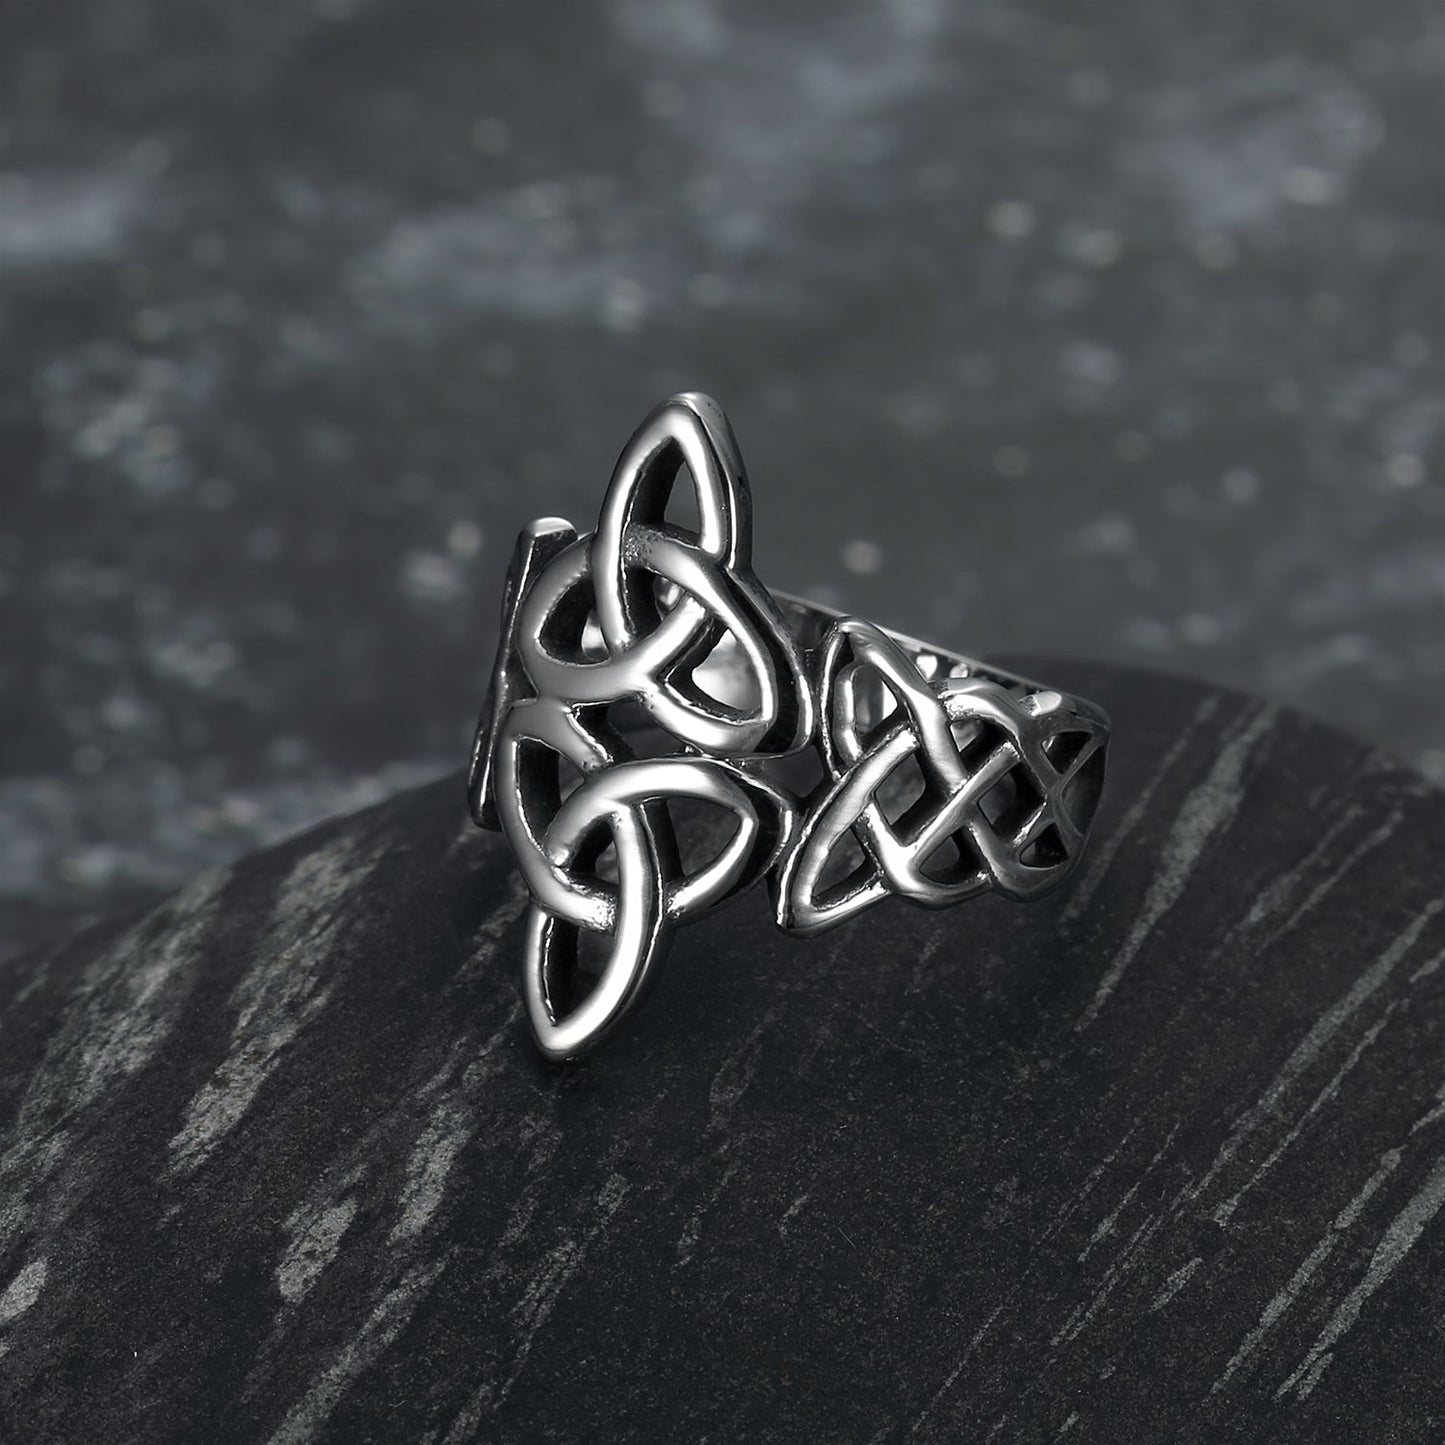 Nordic Pride Handcrafted Stainless Steel Triquetra and Celtic Knot Ring